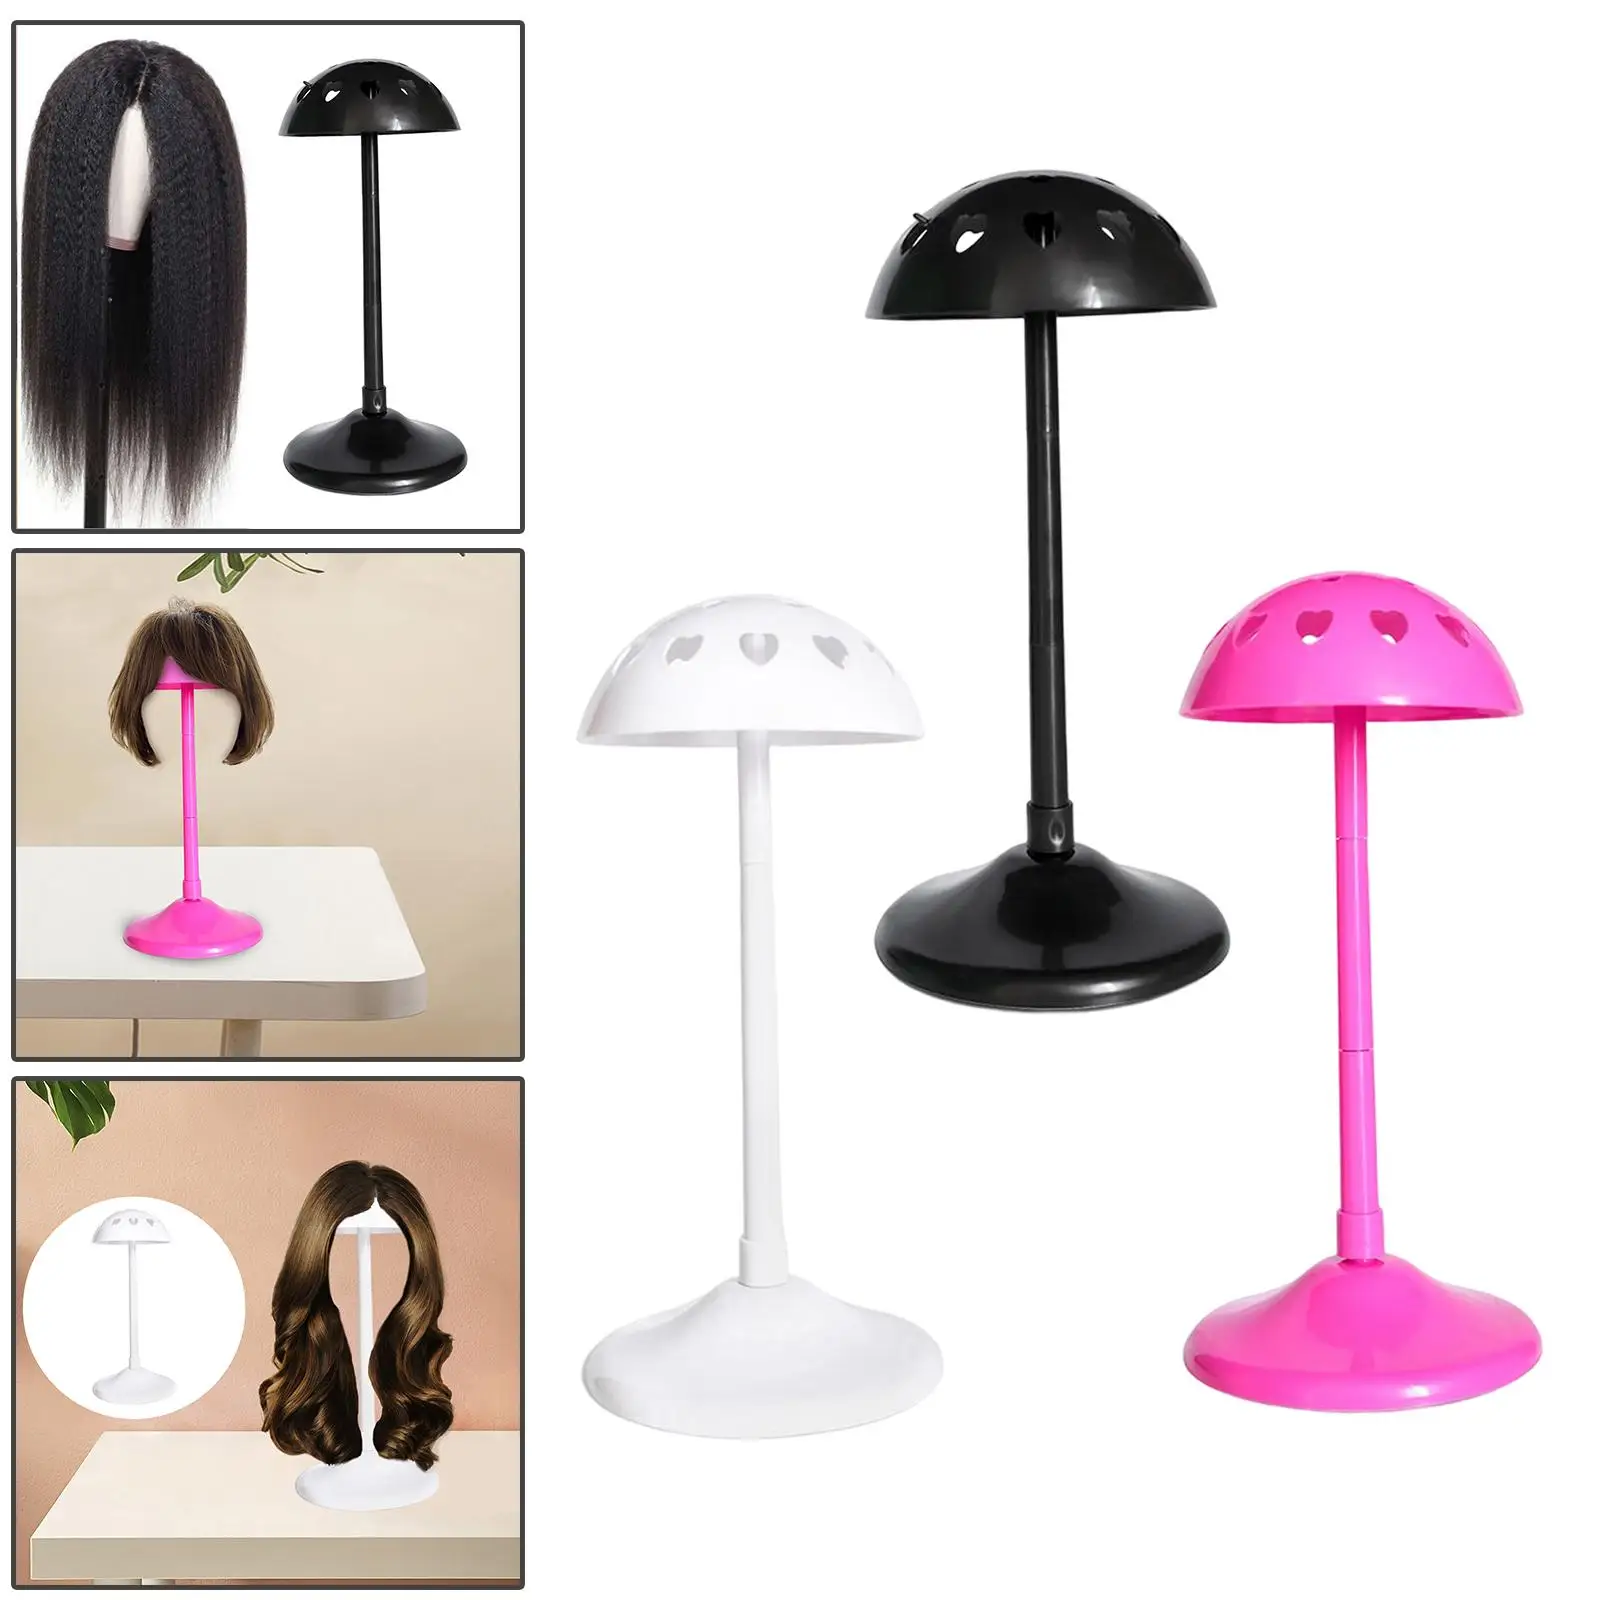 Wig Head Stand Holder Adjustable Rod for Multiple Wig Drying Styling Stylish Appearance